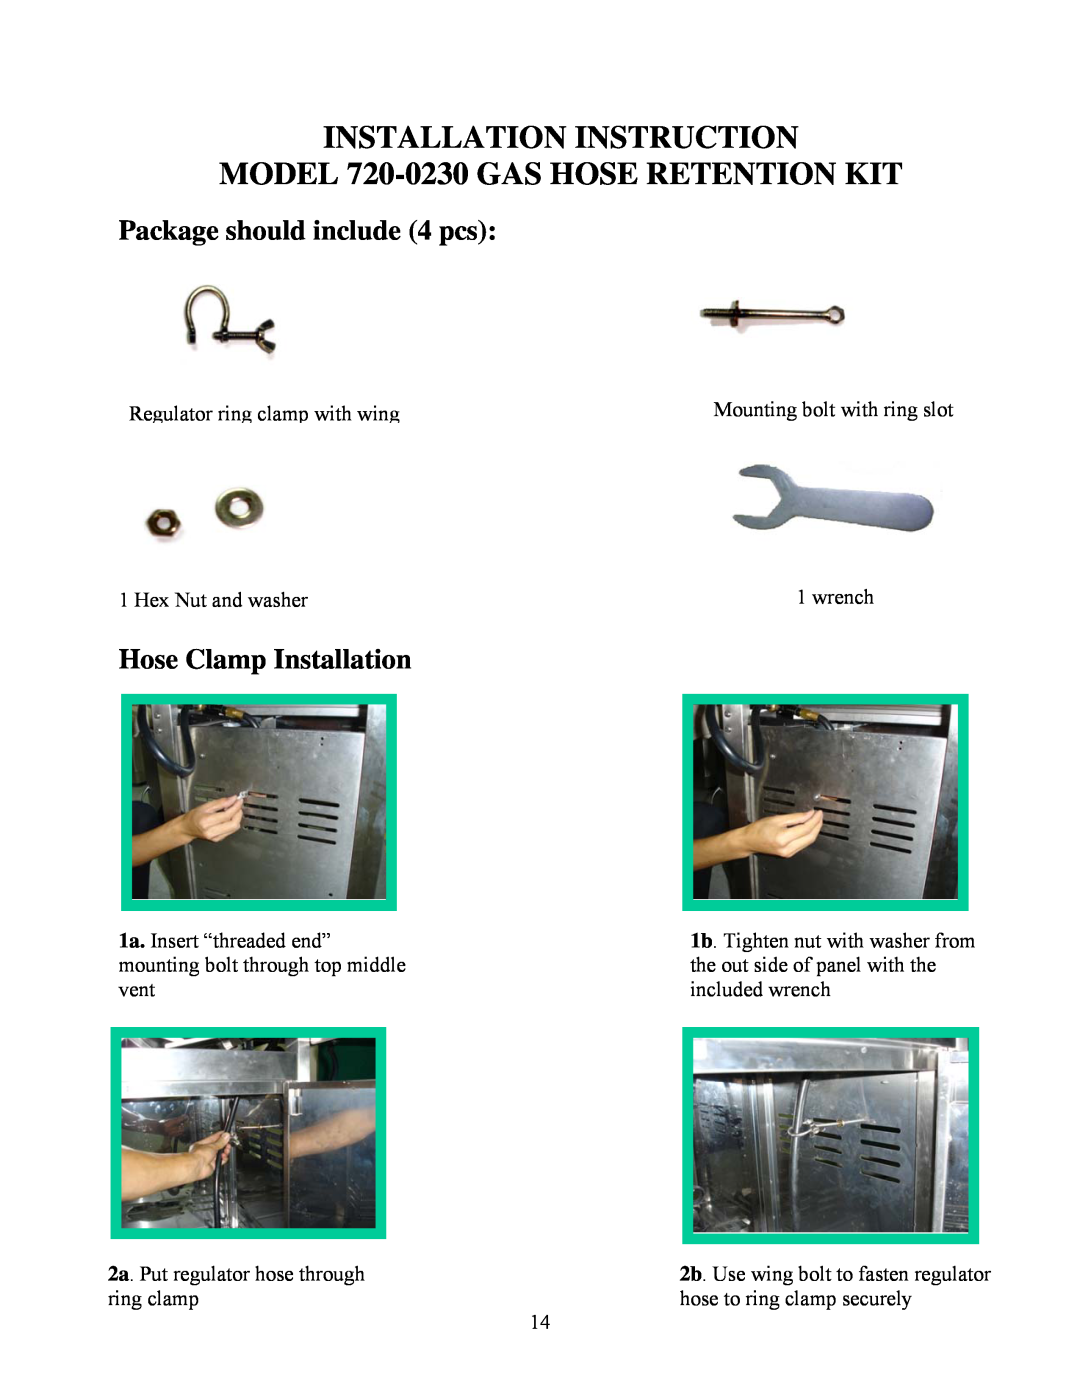 Nexgrill manual INSTALLATION INSTRUCTION MODEL 720-0230 GAS HOSE RETENTION KIT, Package should include 4 pcs 